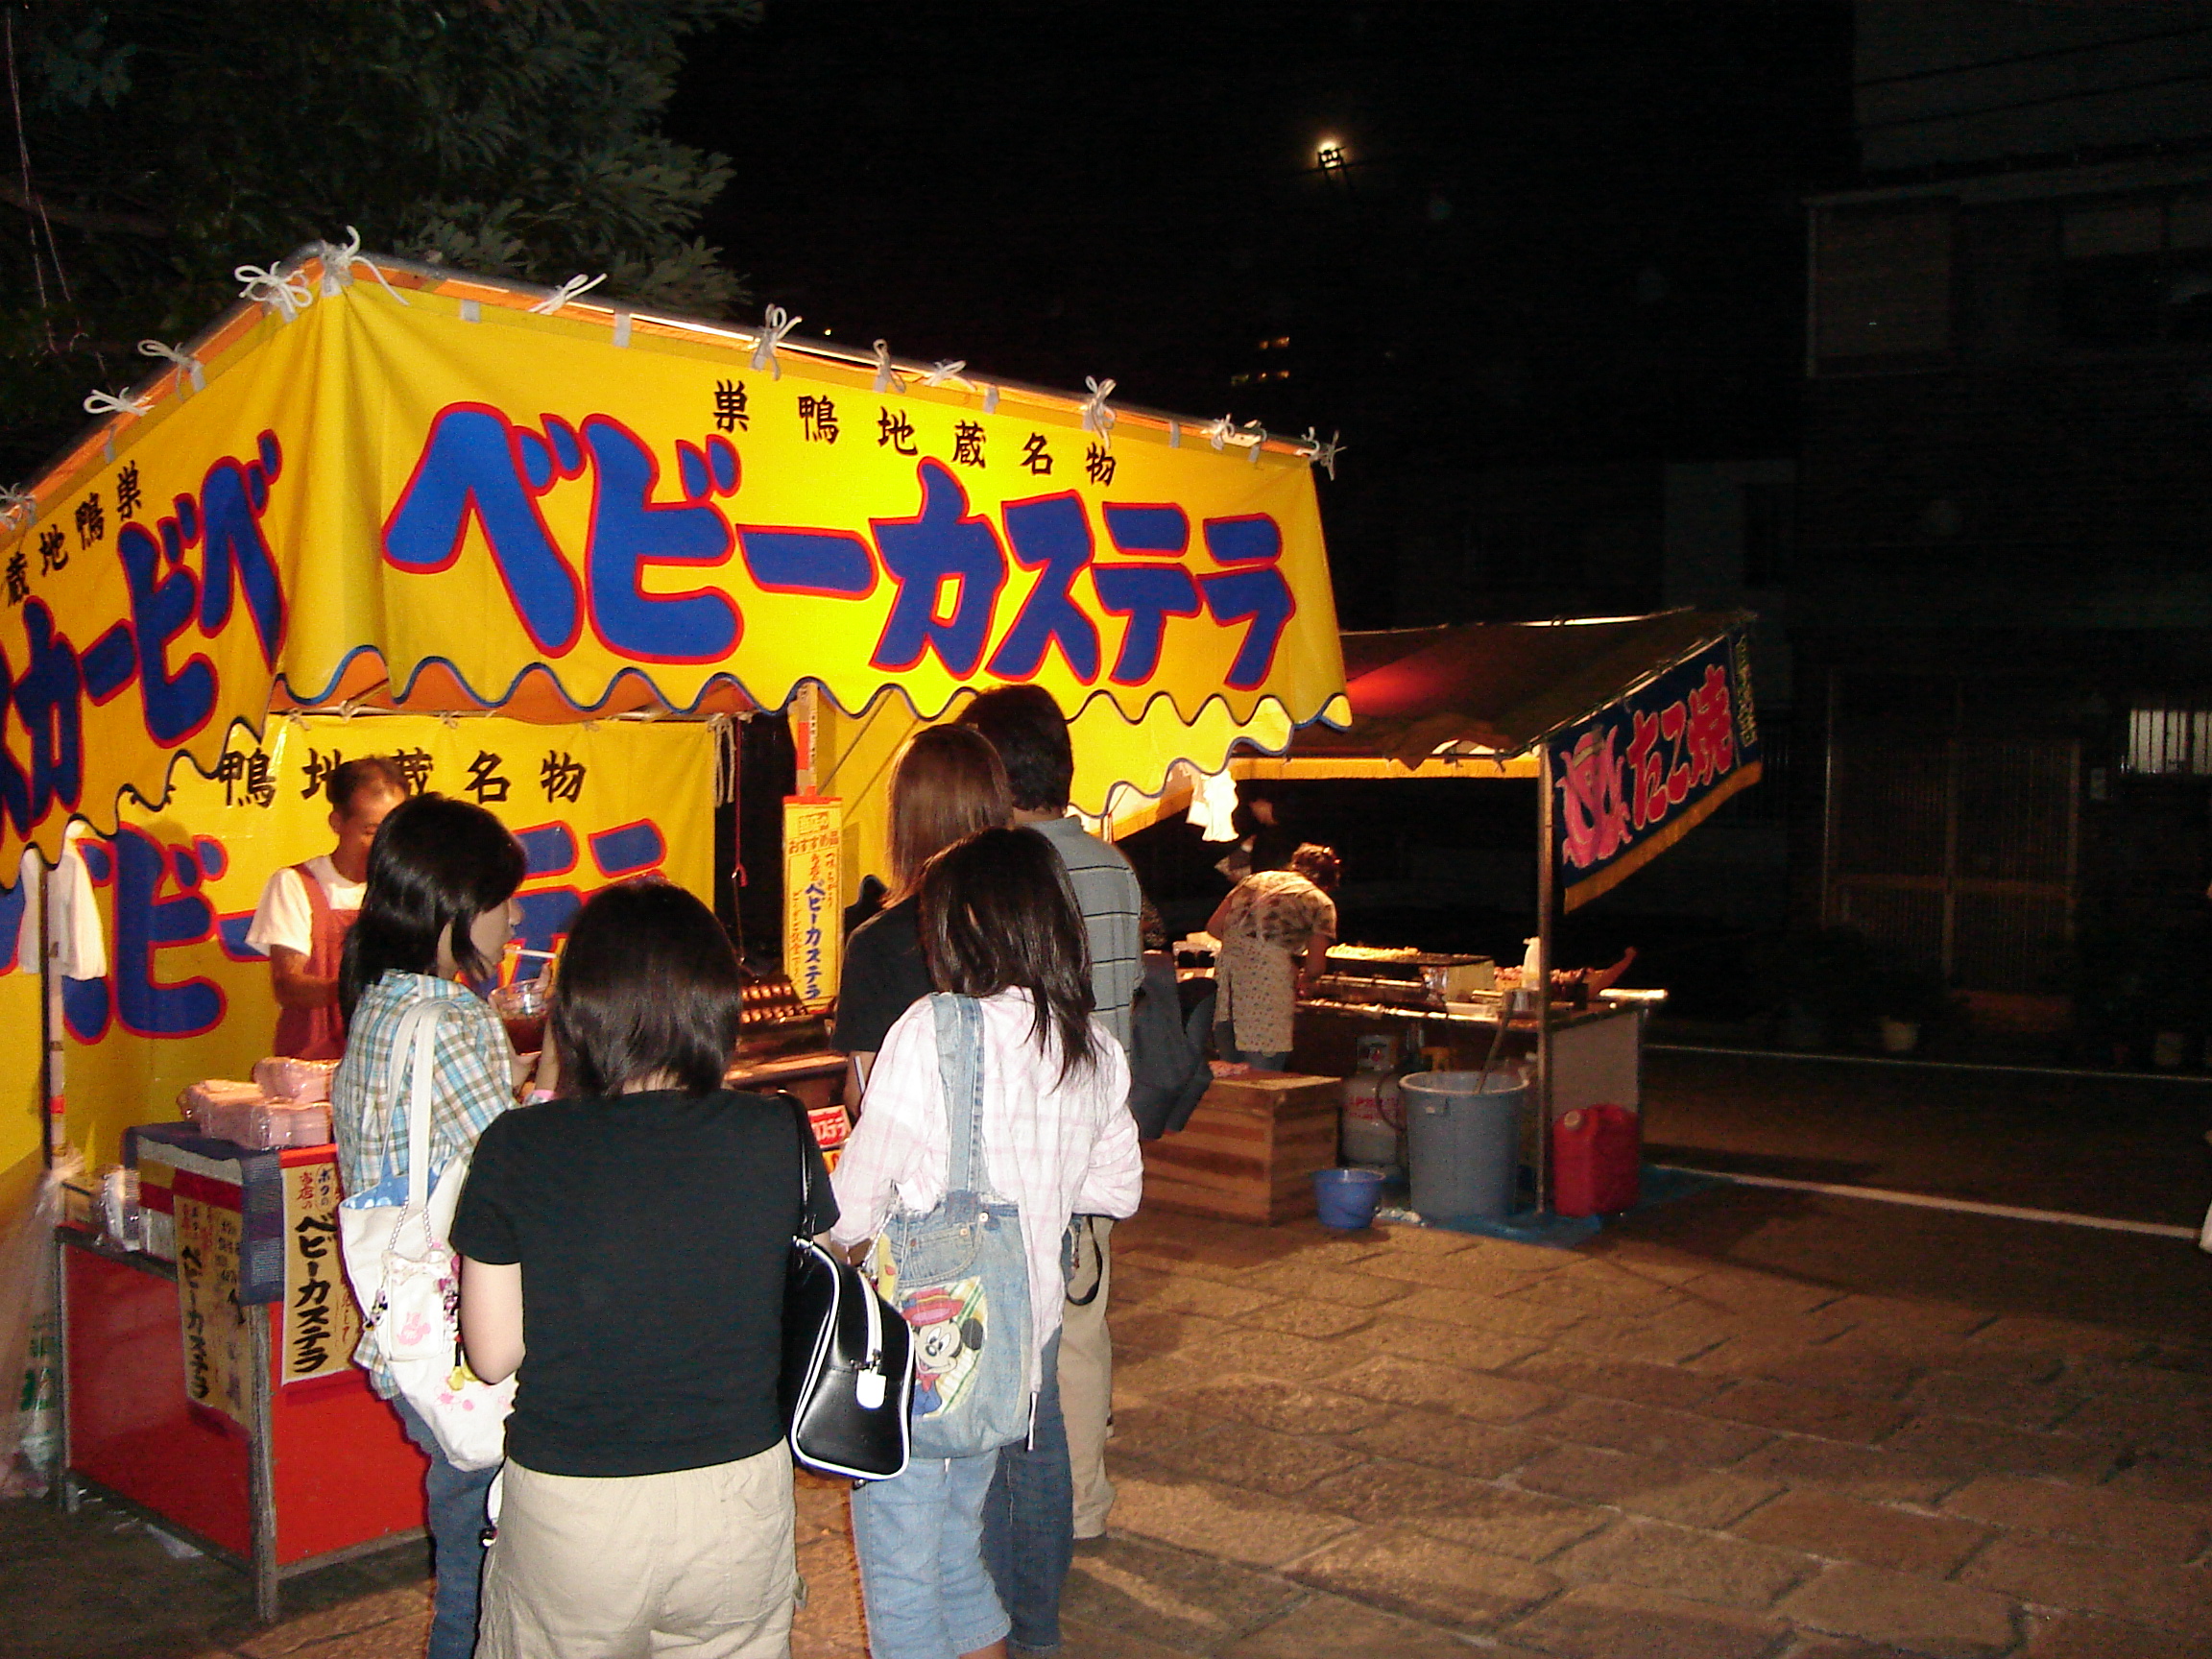 a food stall lit up at night